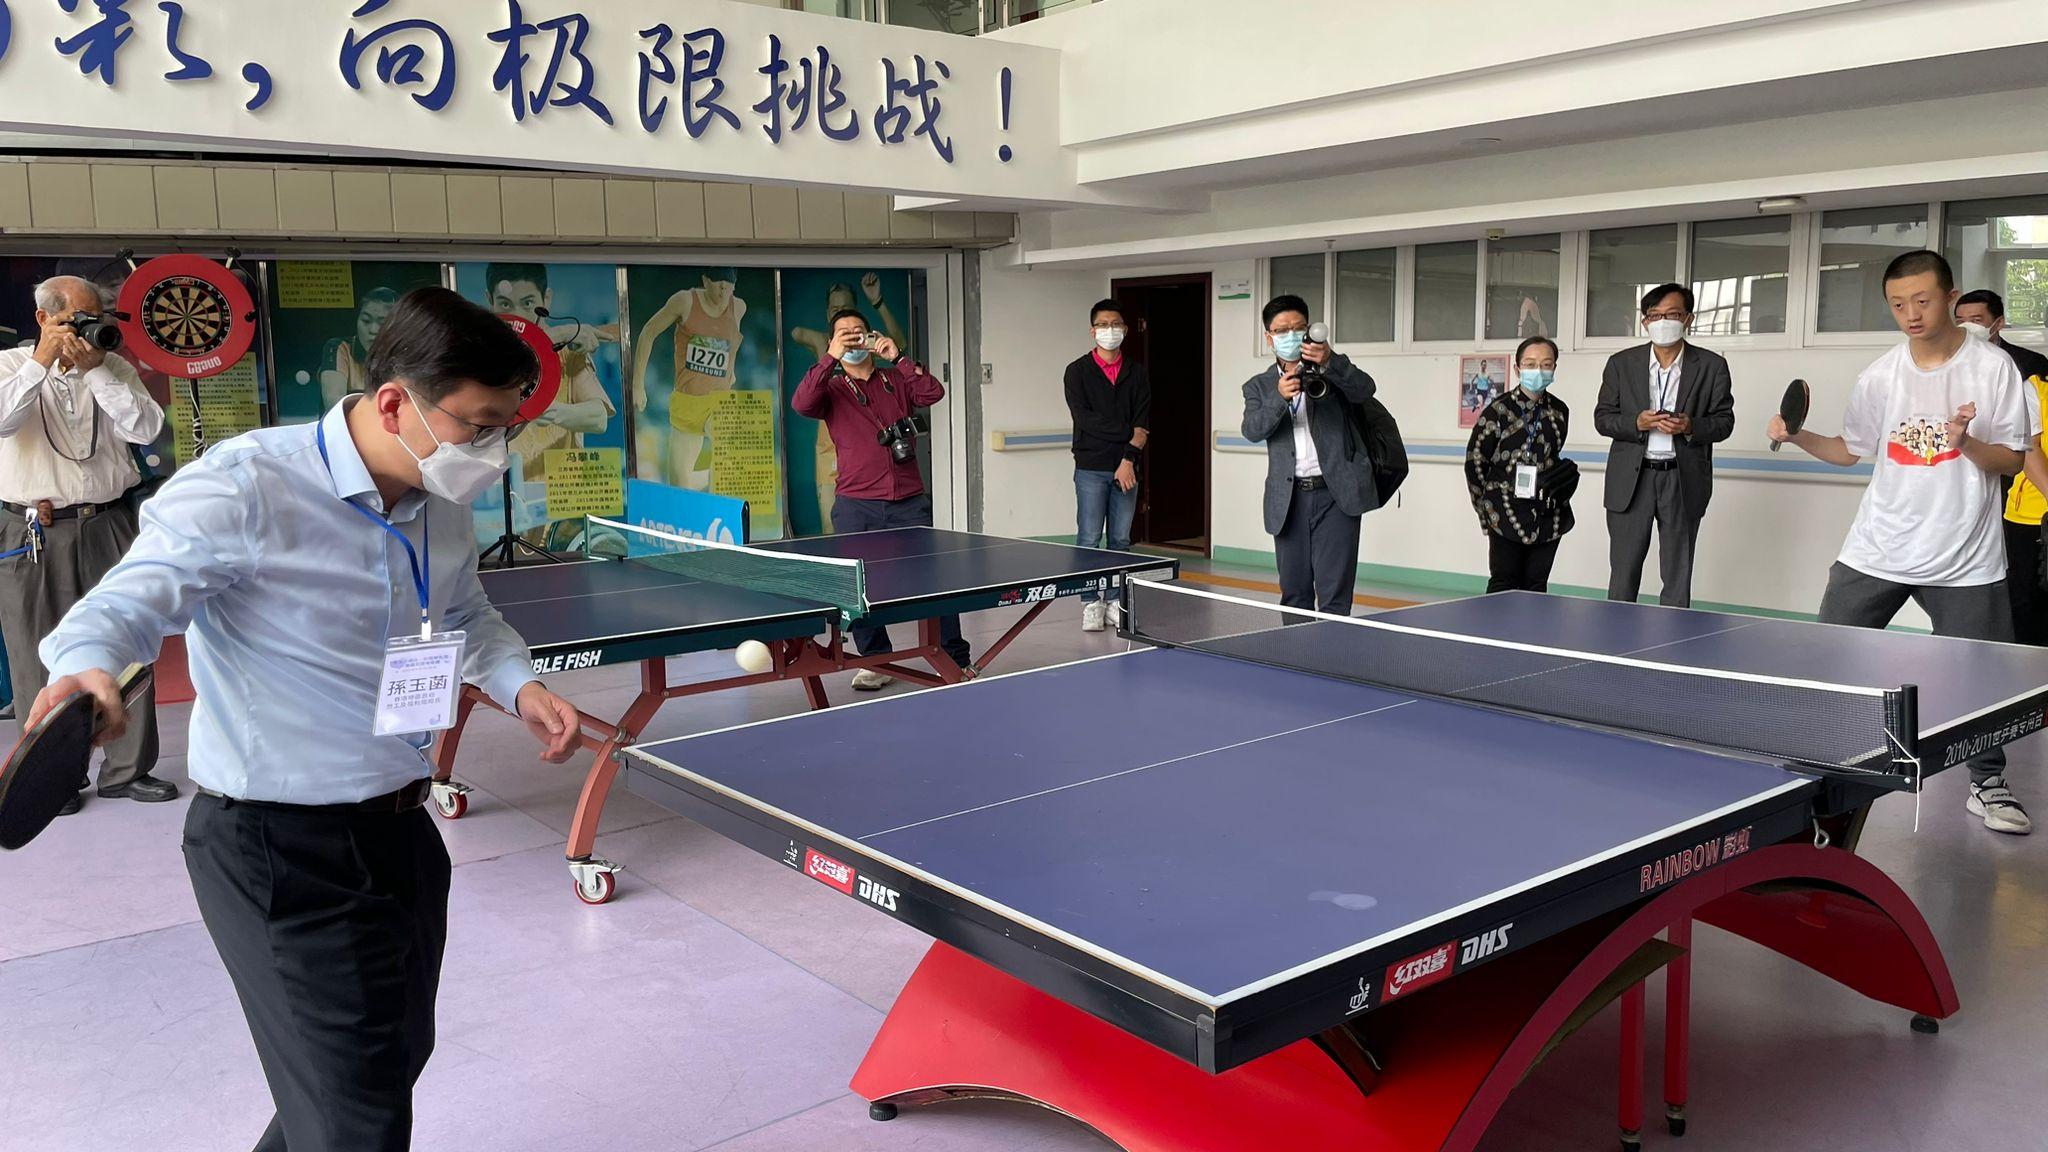 The Secretary for Labour and Welfare, Mr Chris Sun, led the Hong Kong social welfare sector delegation on a visit to Guangdong and visited a rehabilitation centre in Zhongshan Municipality this afternoon (April 26). Photo shows Mr Sun (left, front) playing table tennis with a person with a disability.